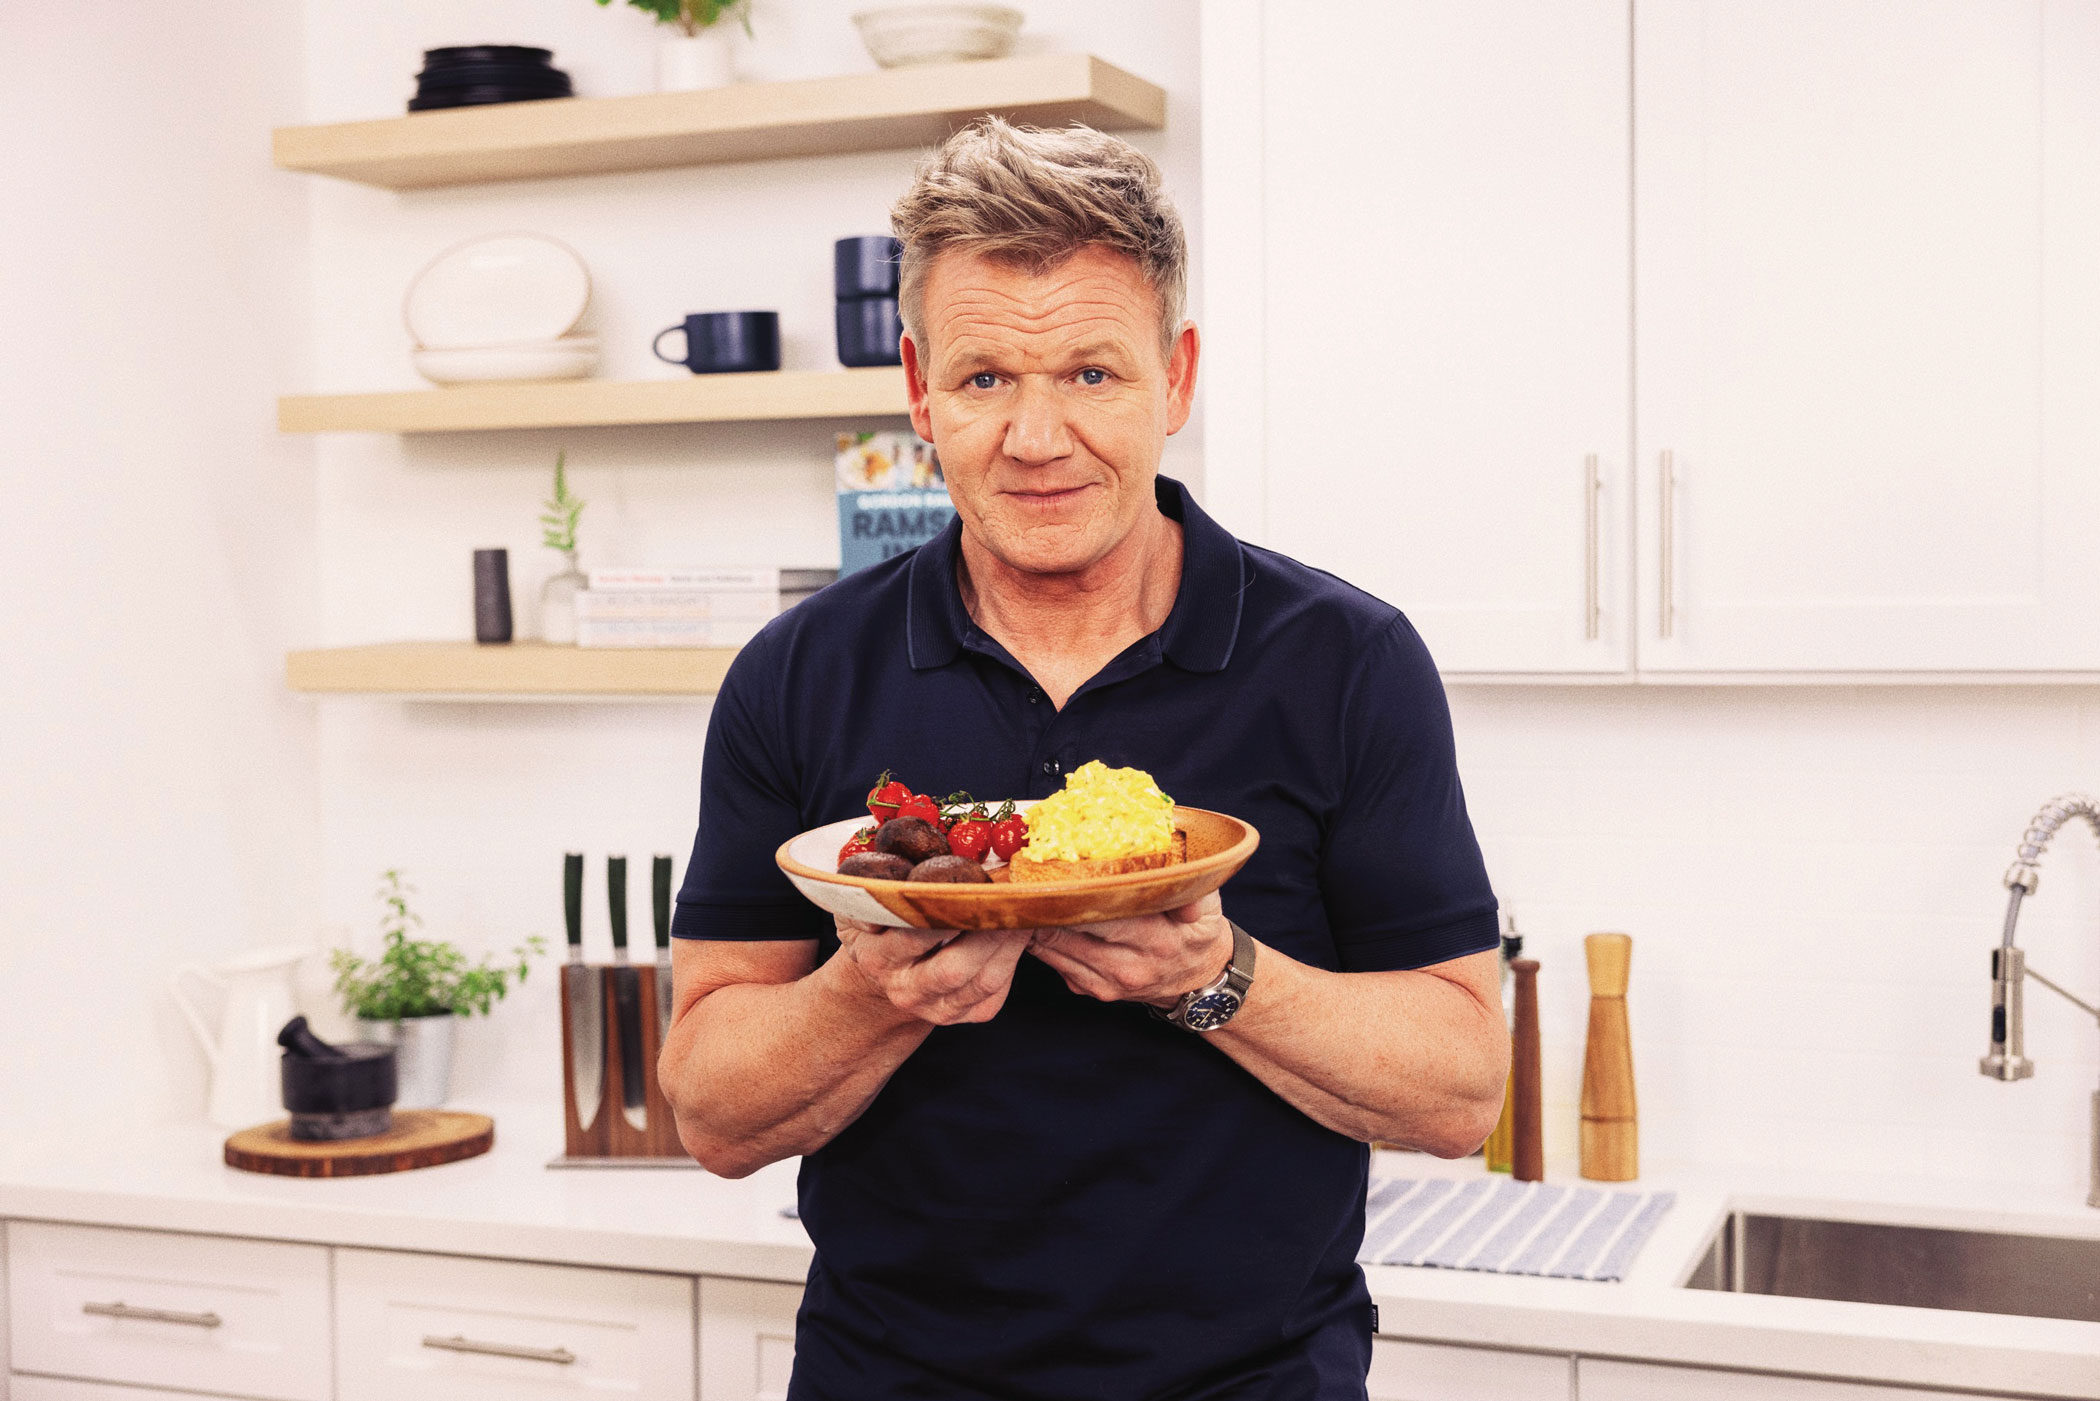 Chef Gordon Ramsay in kitchen holding a plate of scrambled eggs.